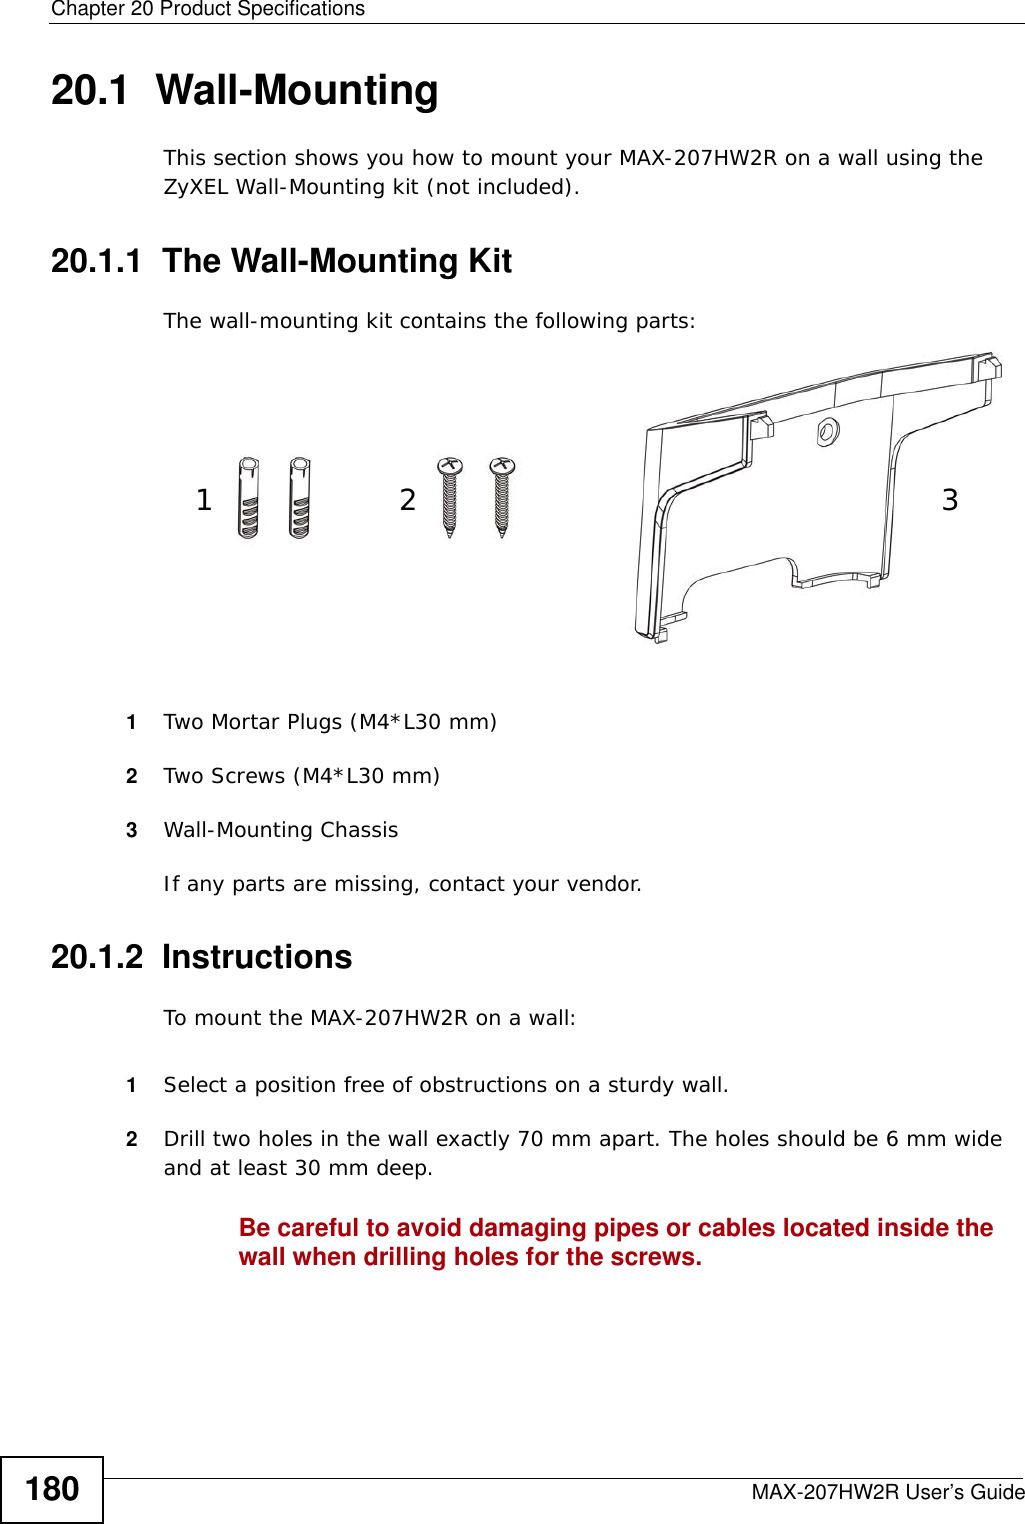 Chapter 20 Product SpecificationsMAX-207HW2R User’s Guide18020.1  Wall-MountingThis section shows you how to mount your MAX-207HW2R on a wall using the ZyXEL Wall-Mounting kit (not included).20.1.1  The Wall-Mounting KitThe wall-mounting kit contains the following parts:1Two Mortar Plugs (M4*L30 mm)2Two Screws (M4*L30 mm)3Wall-Mounting ChassisIf any parts are missing, contact your vendor.20.1.2  InstructionsTo mount the MAX-207HW2R on a wall:1Select a position free of obstructions on a sturdy wall. 2Drill two holes in the wall exactly 70 mm apart. The holes should be 6 mm wide and at least 30 mm deep.Be careful to avoid damaging pipes or cables located inside the wall when drilling holes for the screws.12 3